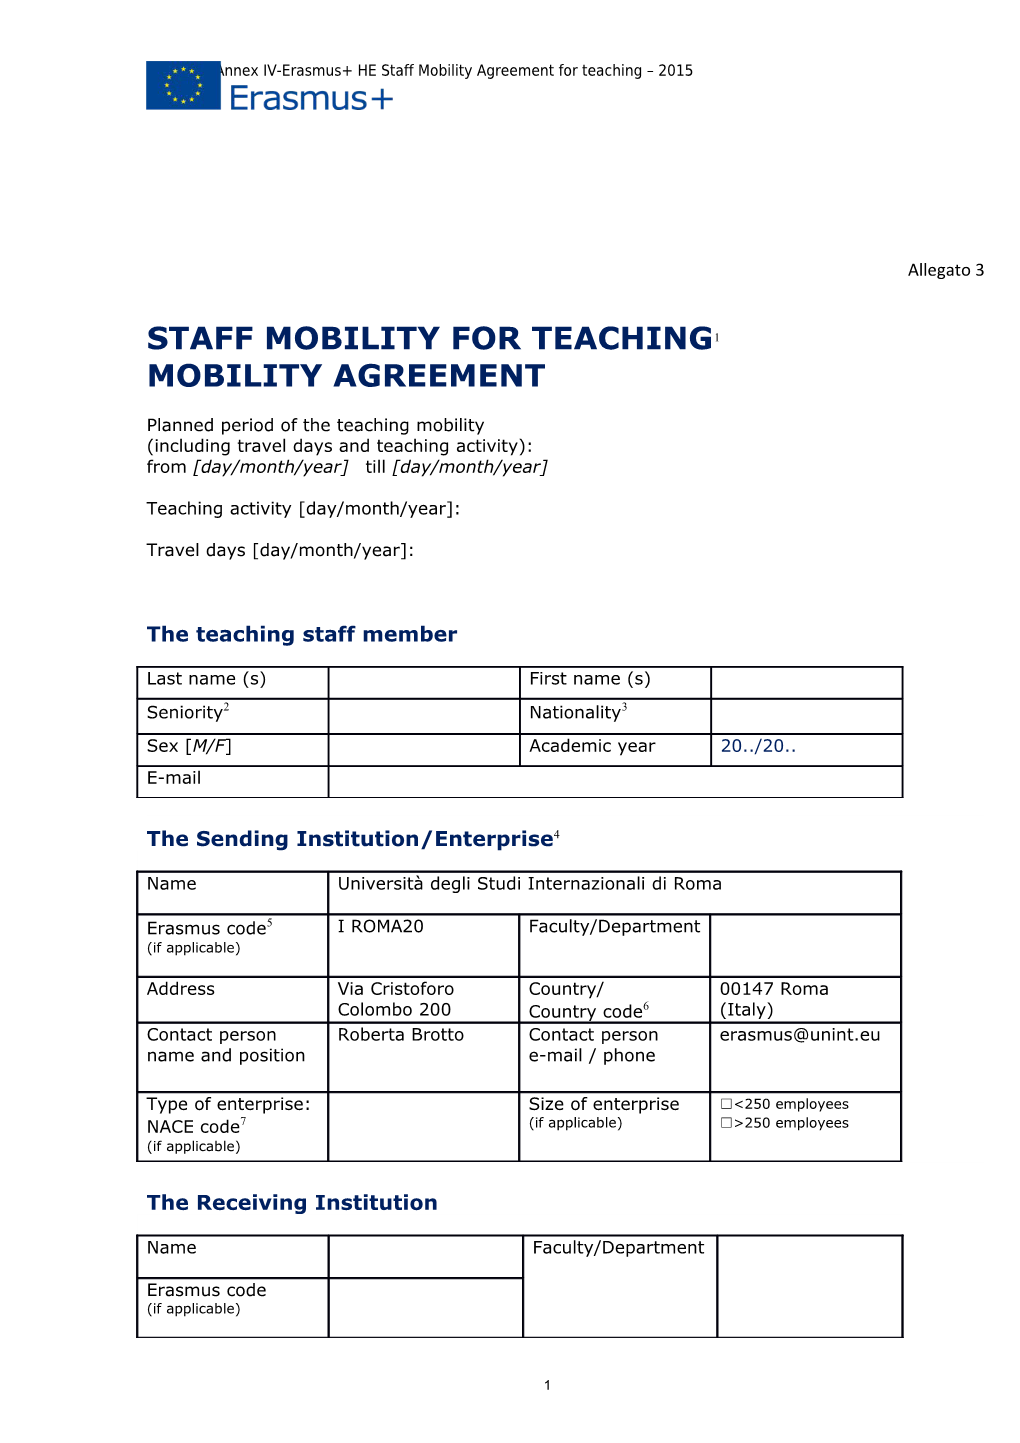 Gfna-II-C-Annex IV-Erasmus+ HE Staff Mobility Agreement for Teaching 2015 s2